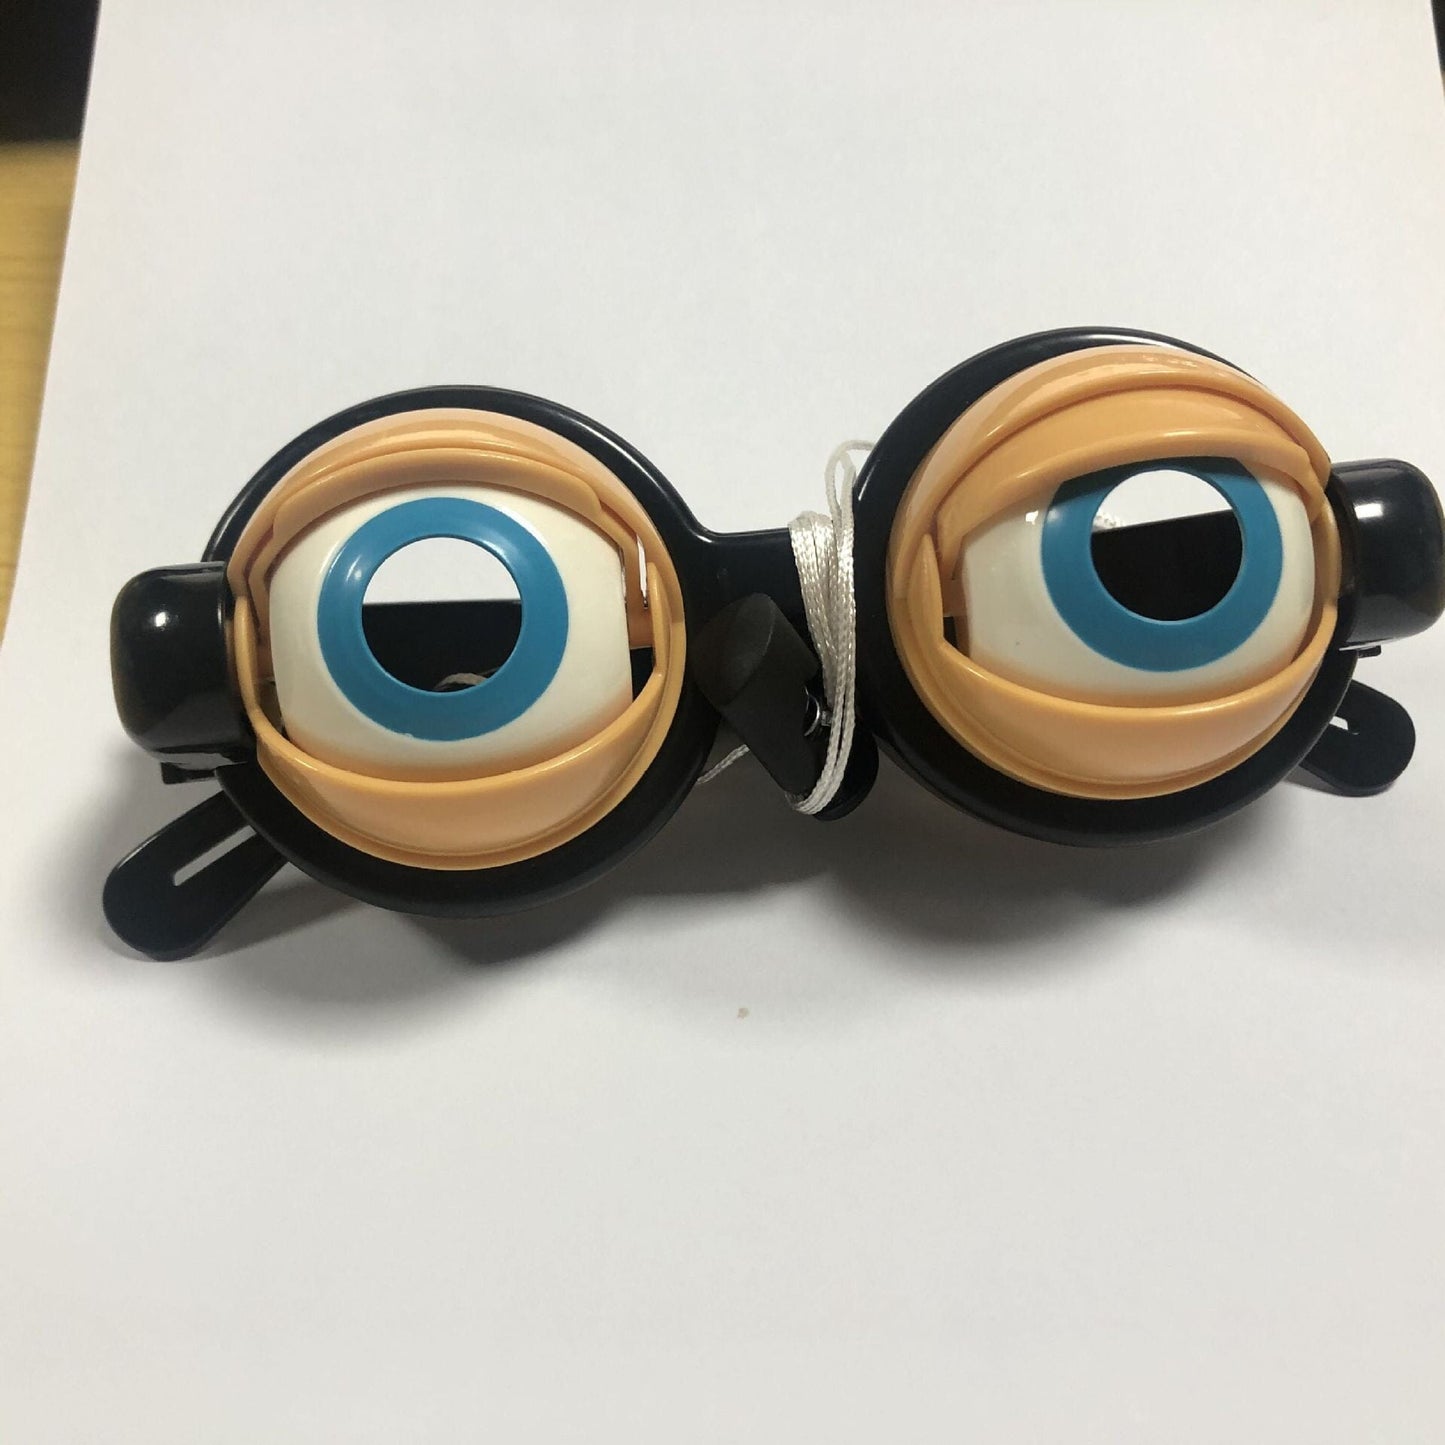 Googly Eye Glasses - Add a Bit of Fun to Any Occasion! – Pubbets!